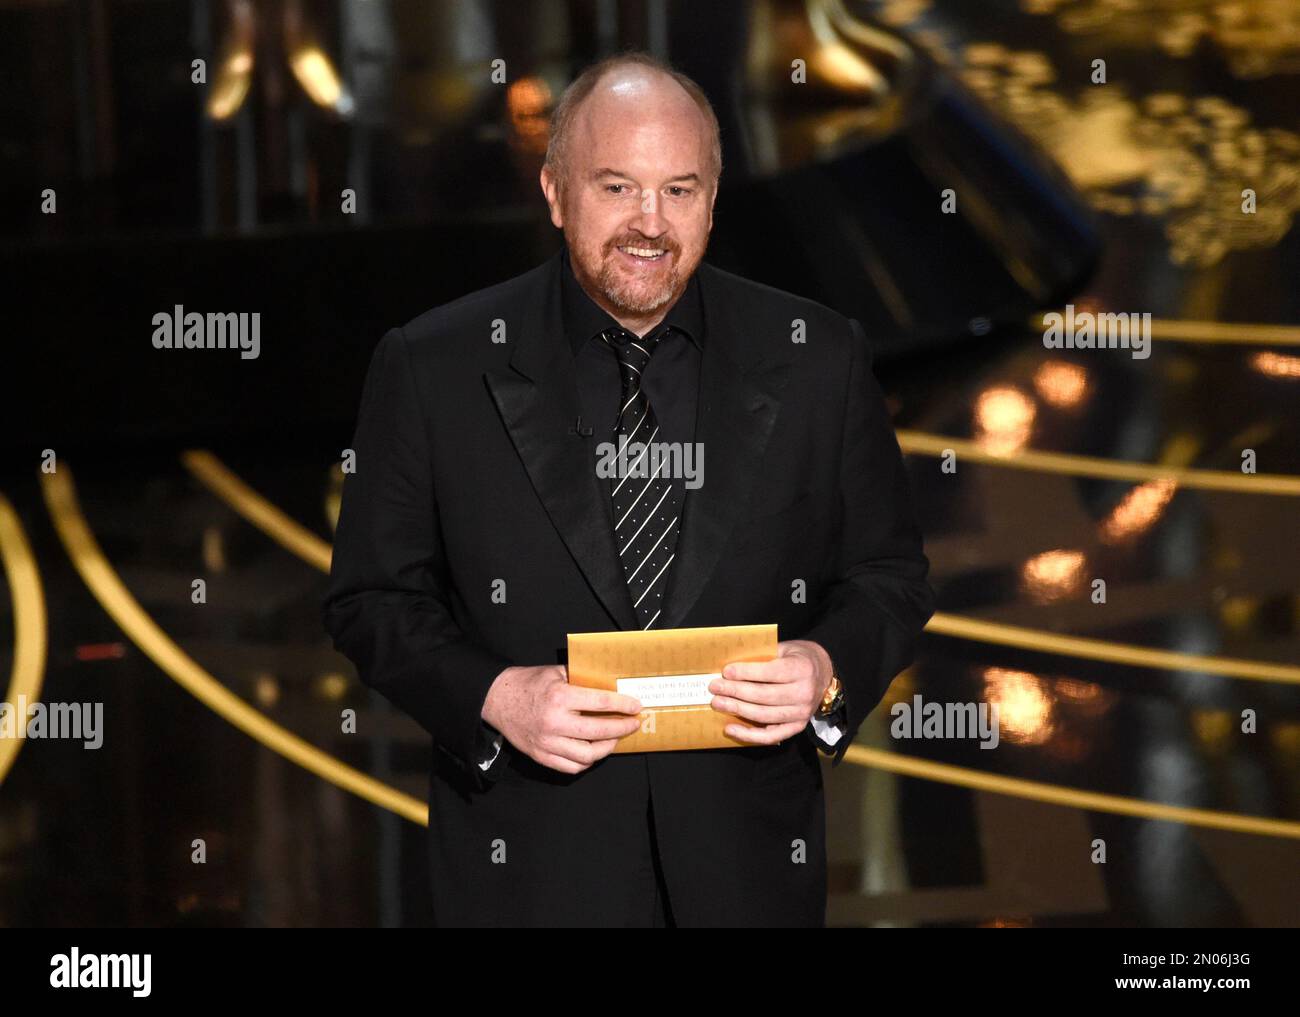 louis ck dolby